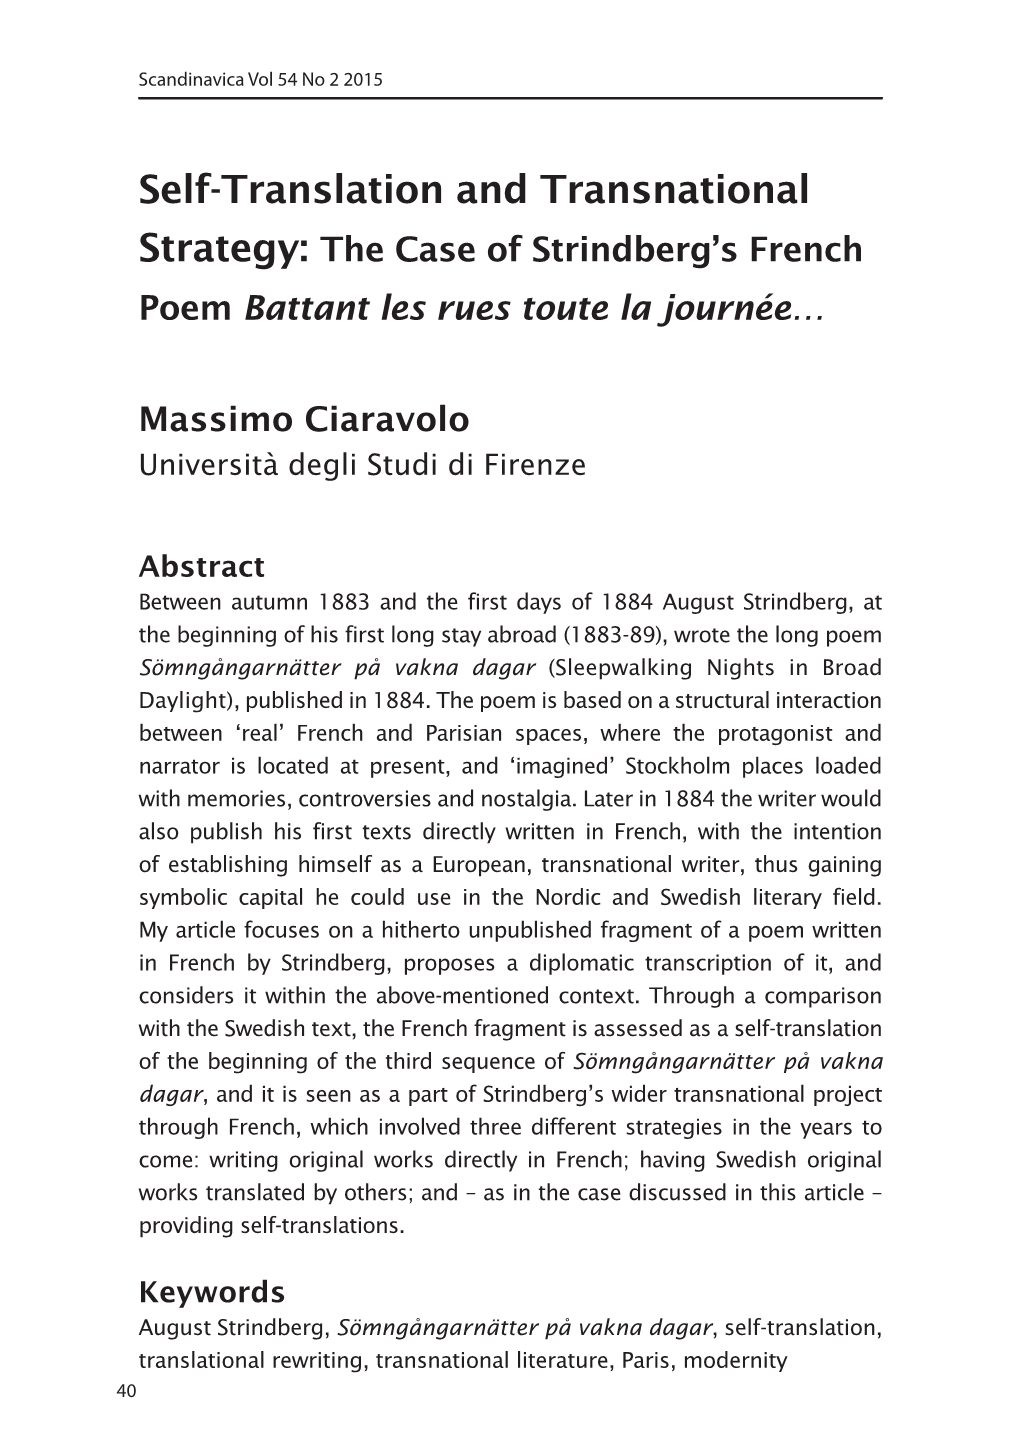 Self-Translation and Transnational Strategy: the Case of Strindberg's French